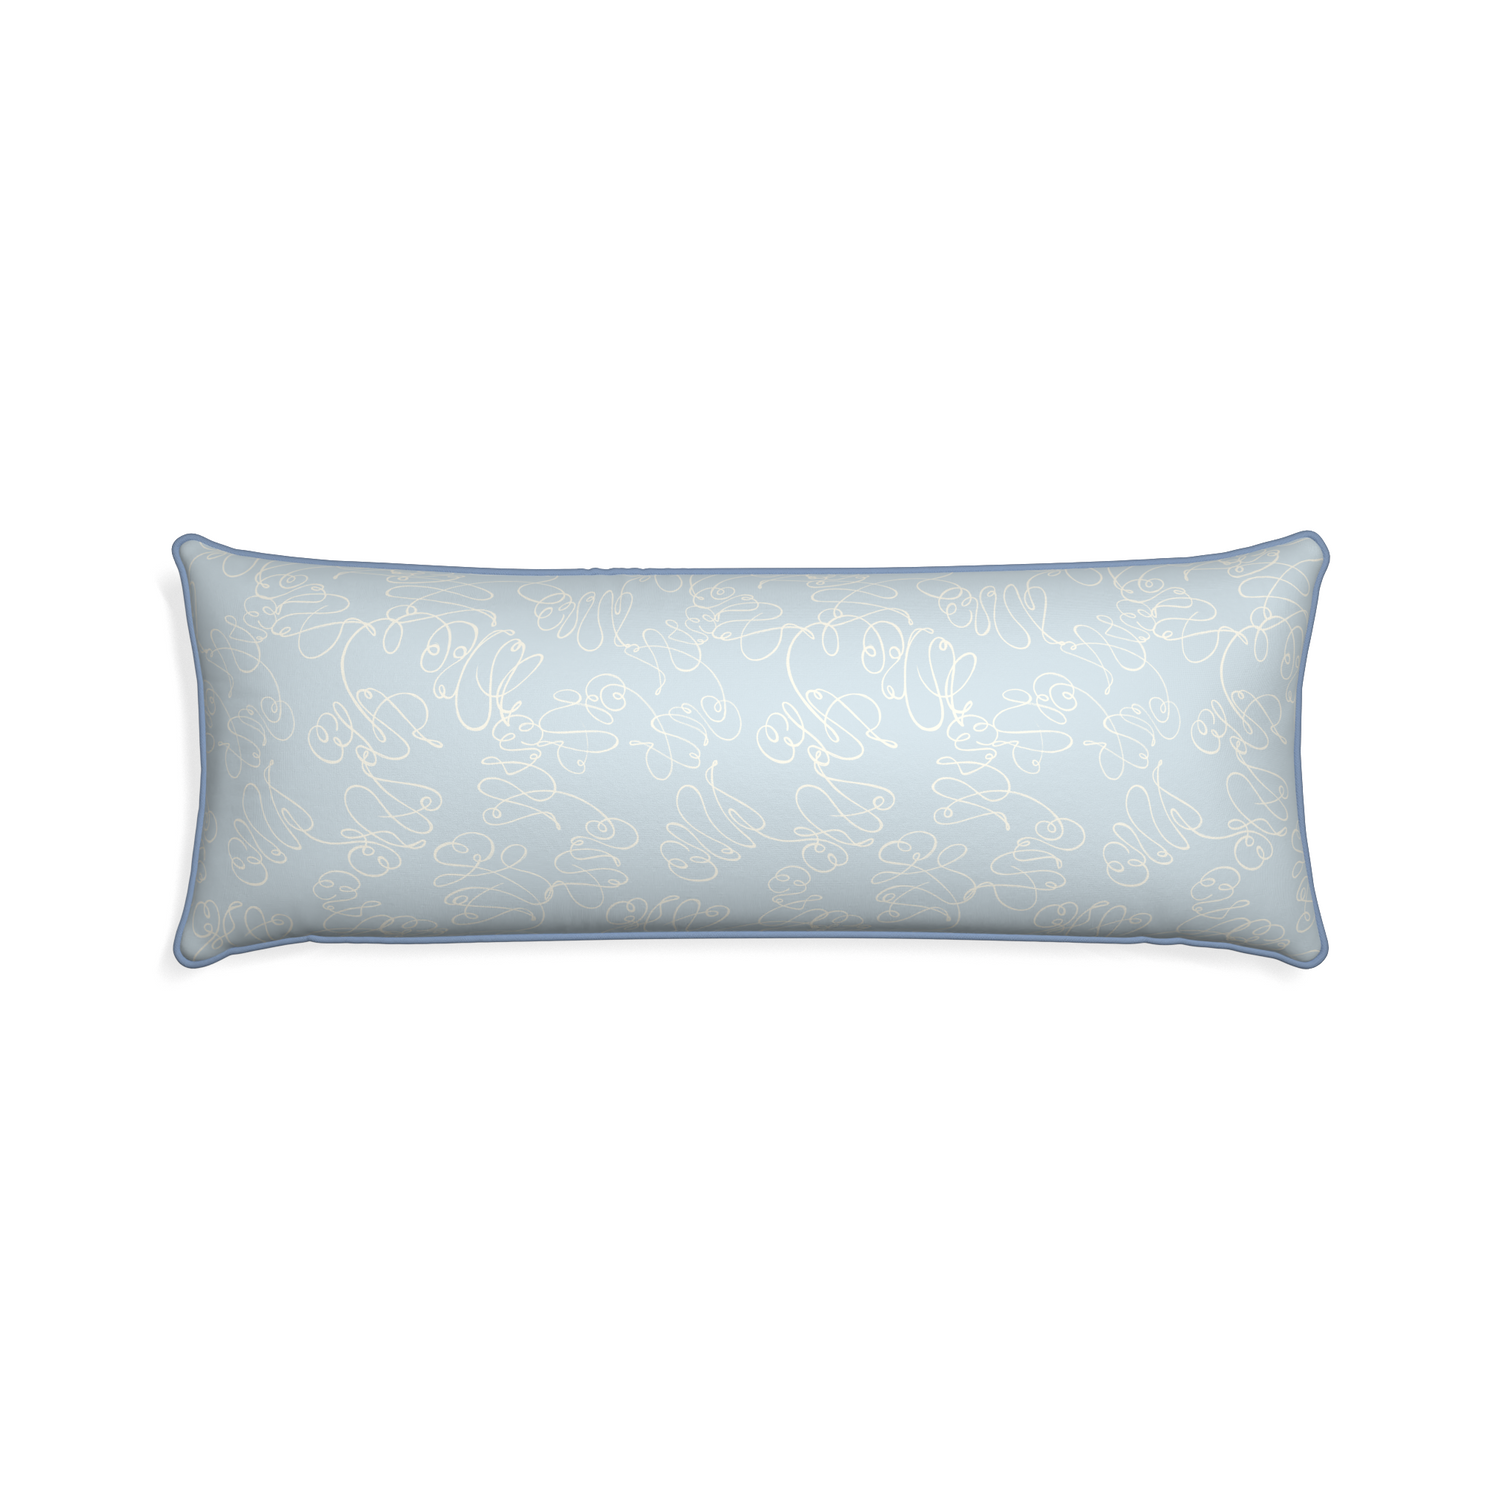 Xl-lumbar mirabella custom powder blue abstractpillow with sky piping on white background